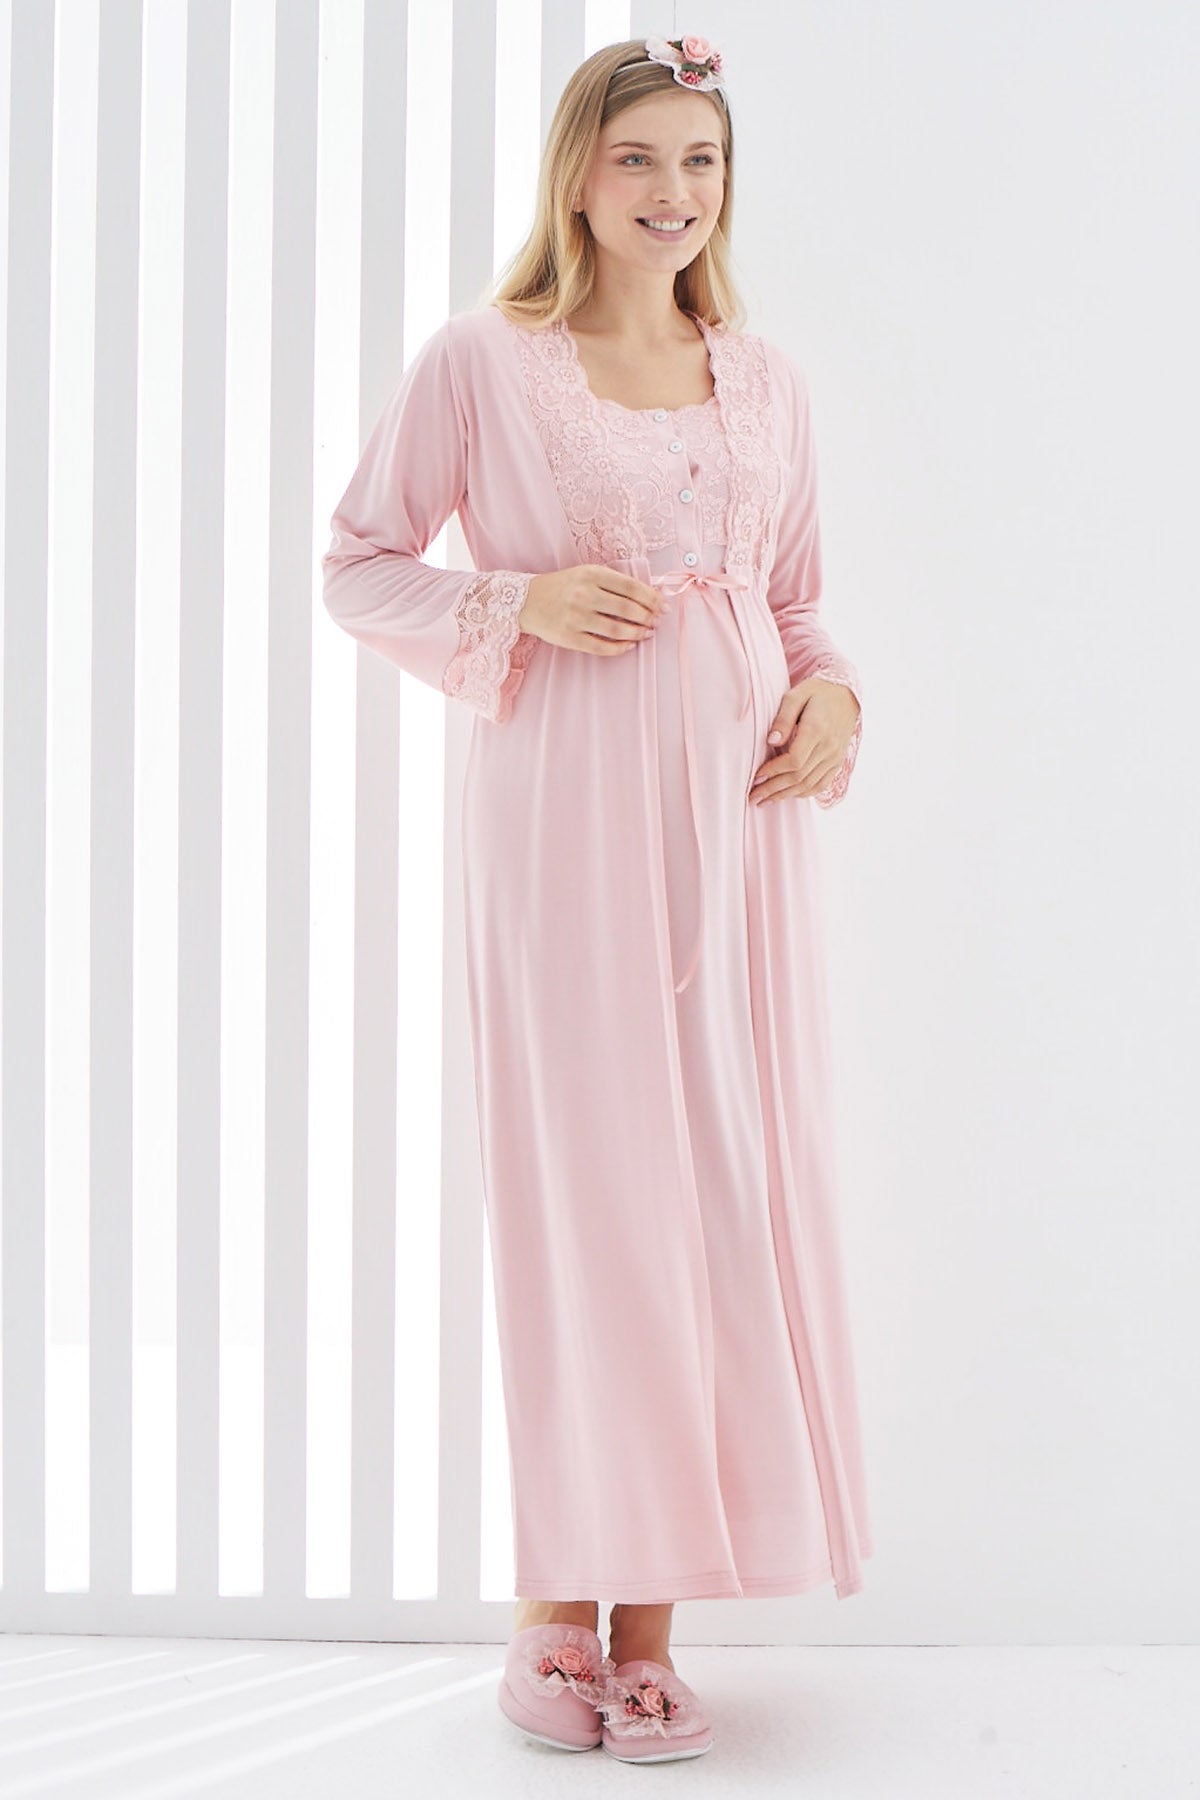 Shopymommy 2267 Maternity & Nursing Nightgown With Lace Sleeve Robe Powder